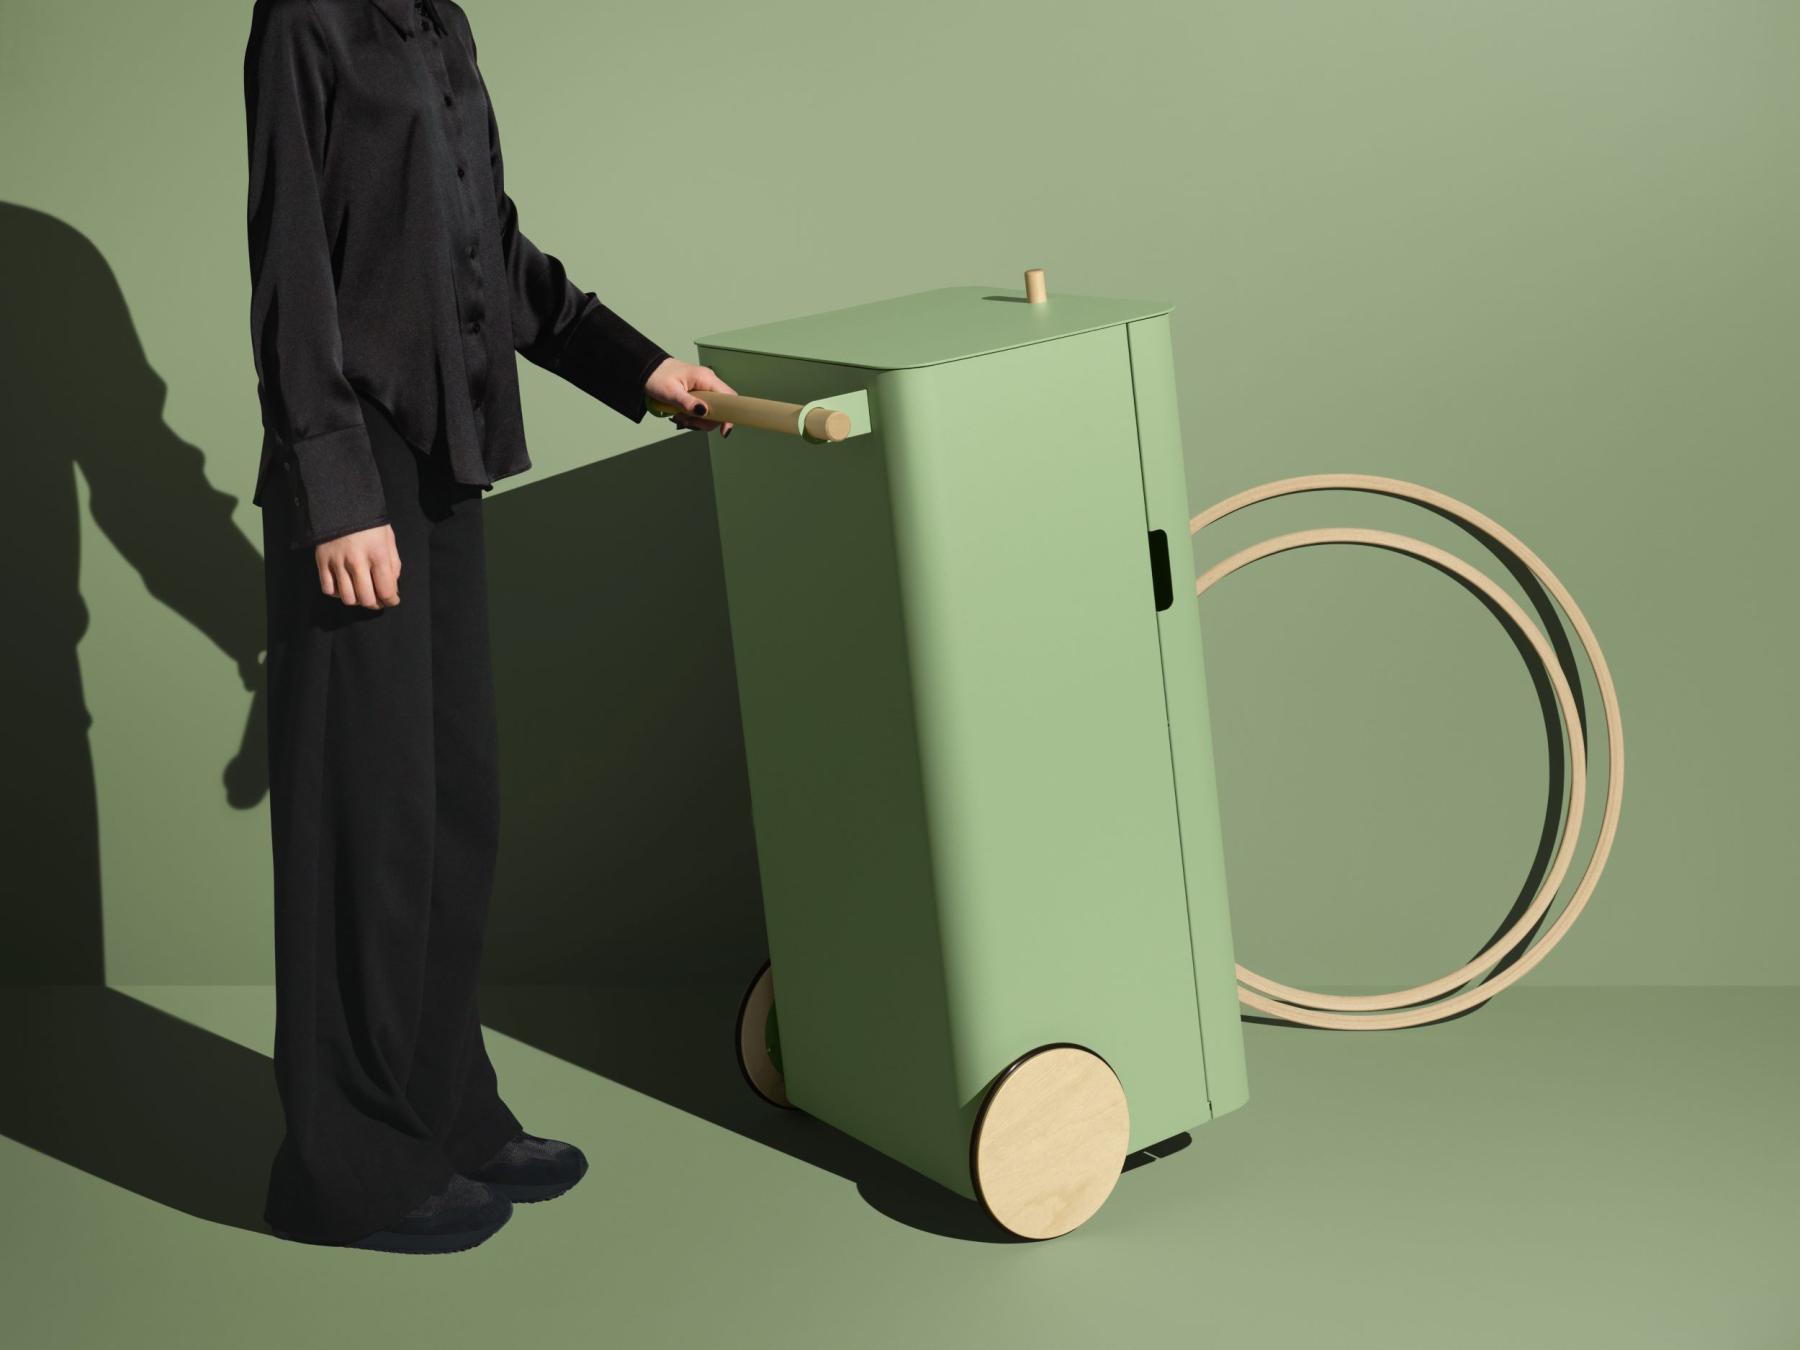 Arkityp is together with Arkiv and Arkad part of an elegant product series for waste disposal, perfectly adapted to stand together, or alone. The aesthetic is based on the archetype waste bin, but with playful and thoughtful details added. Typical function with atypical shape.